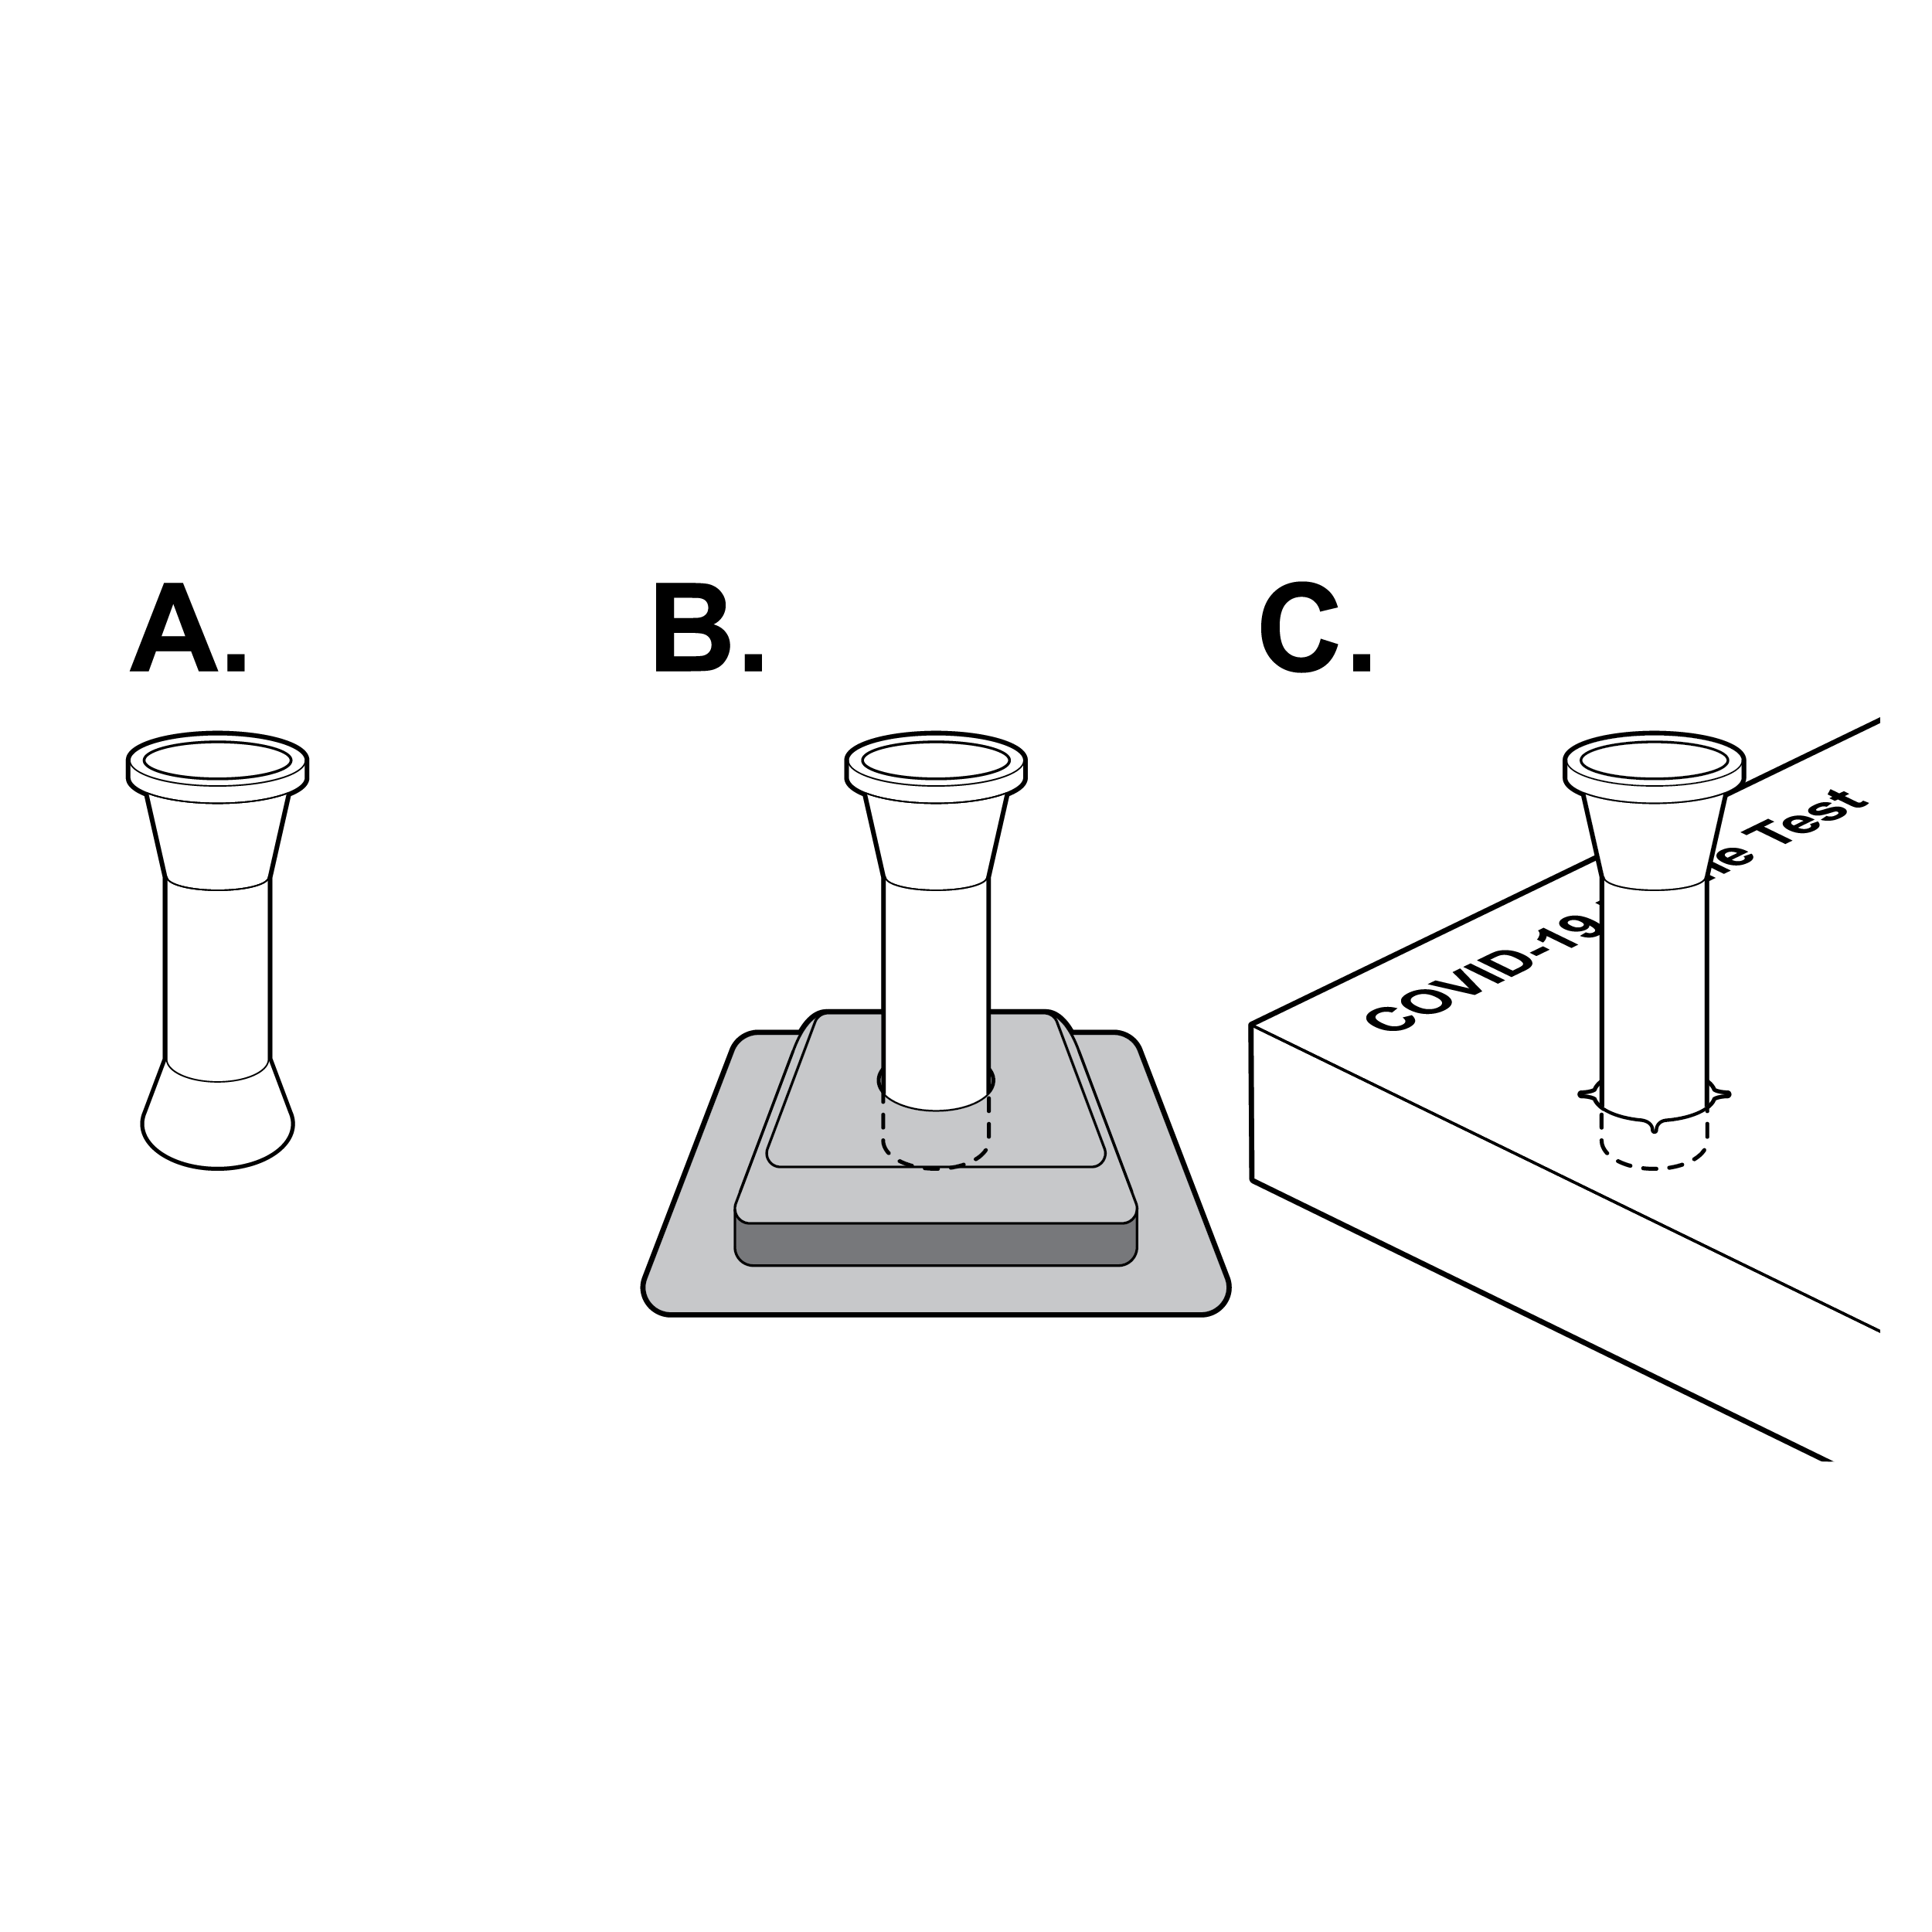 Three options are illustrated. Under option A, a fluid vial is shown with a with a wide base, narrow midsection, and wide top. Under option B, a fluid vial is inserted into a stand with a feature that holds the base of the vial. Under option C, a fluid vial is inserted into a cut out in the outer packaging of a test kit.